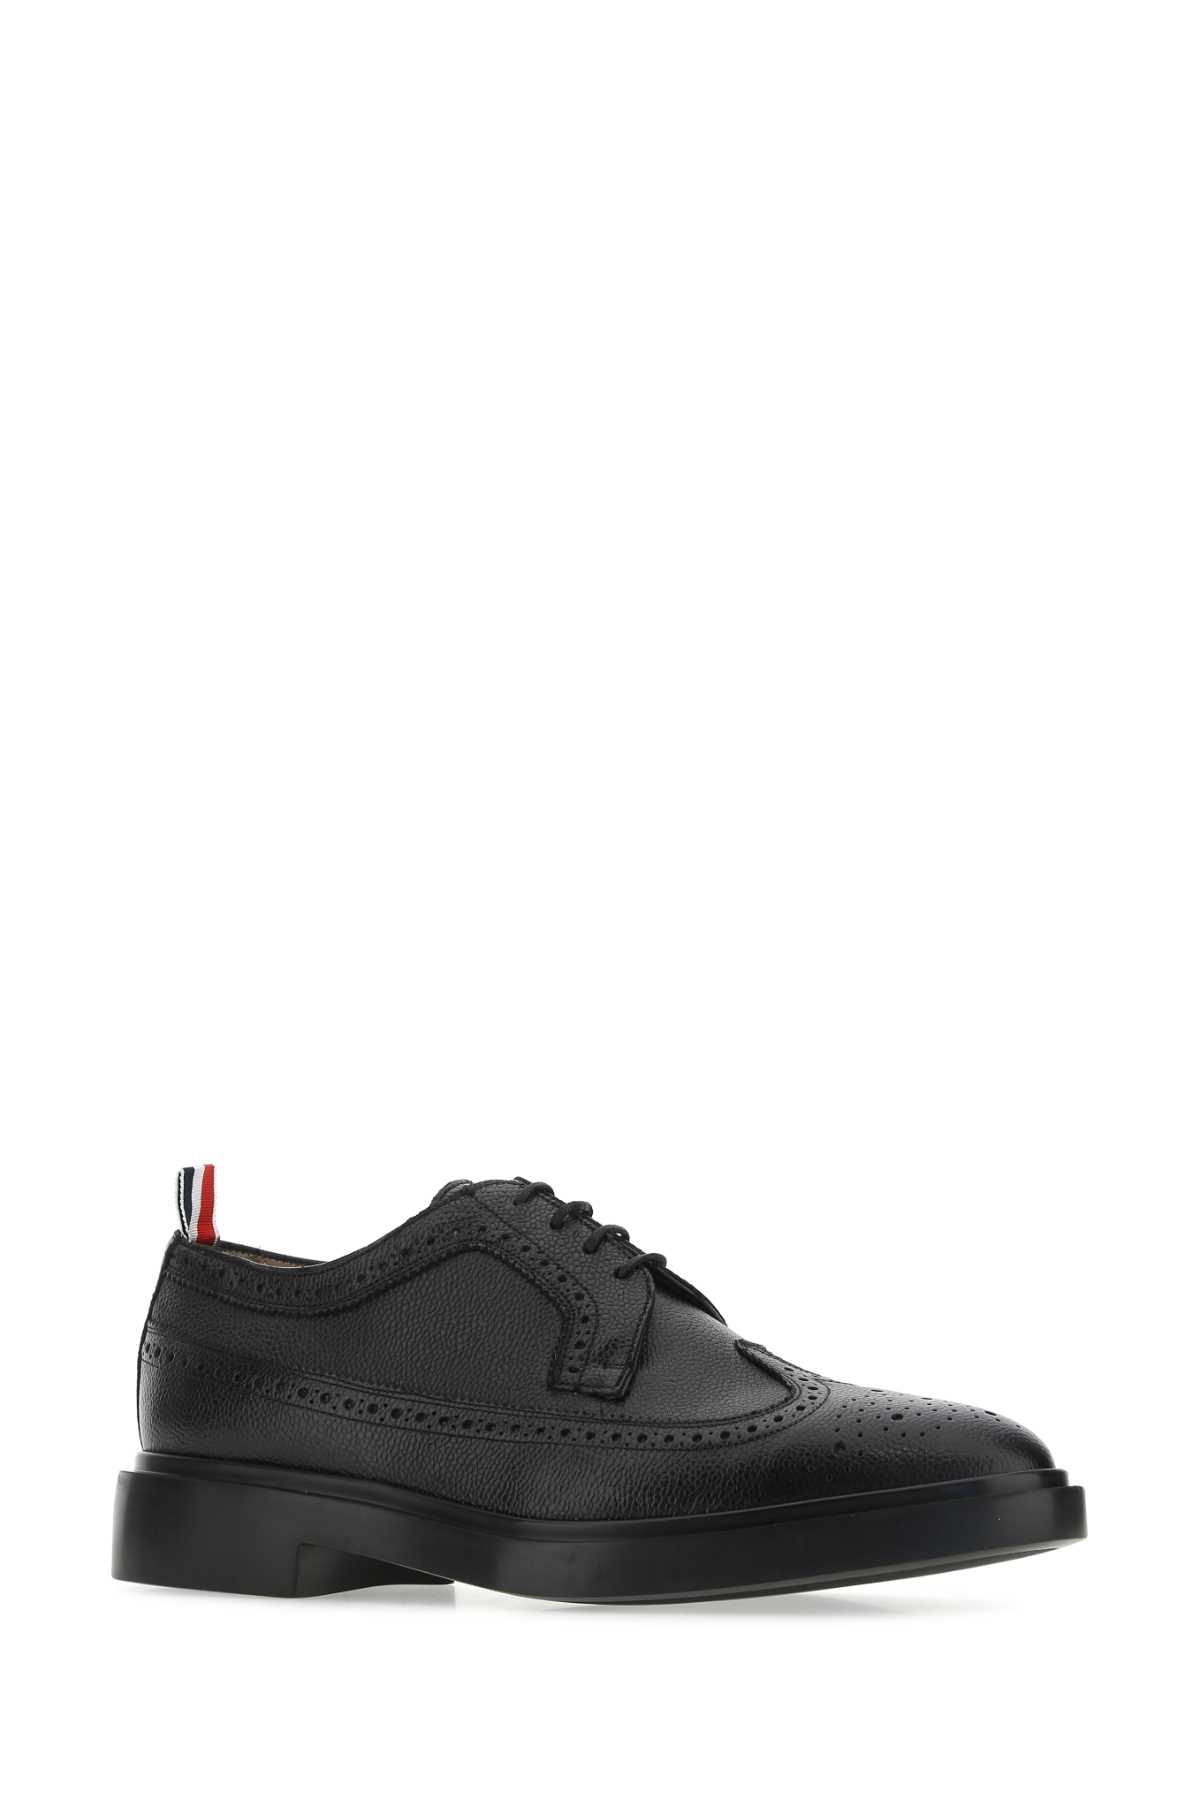 Thom Browne Black Leather Lace-up Shoes In 001